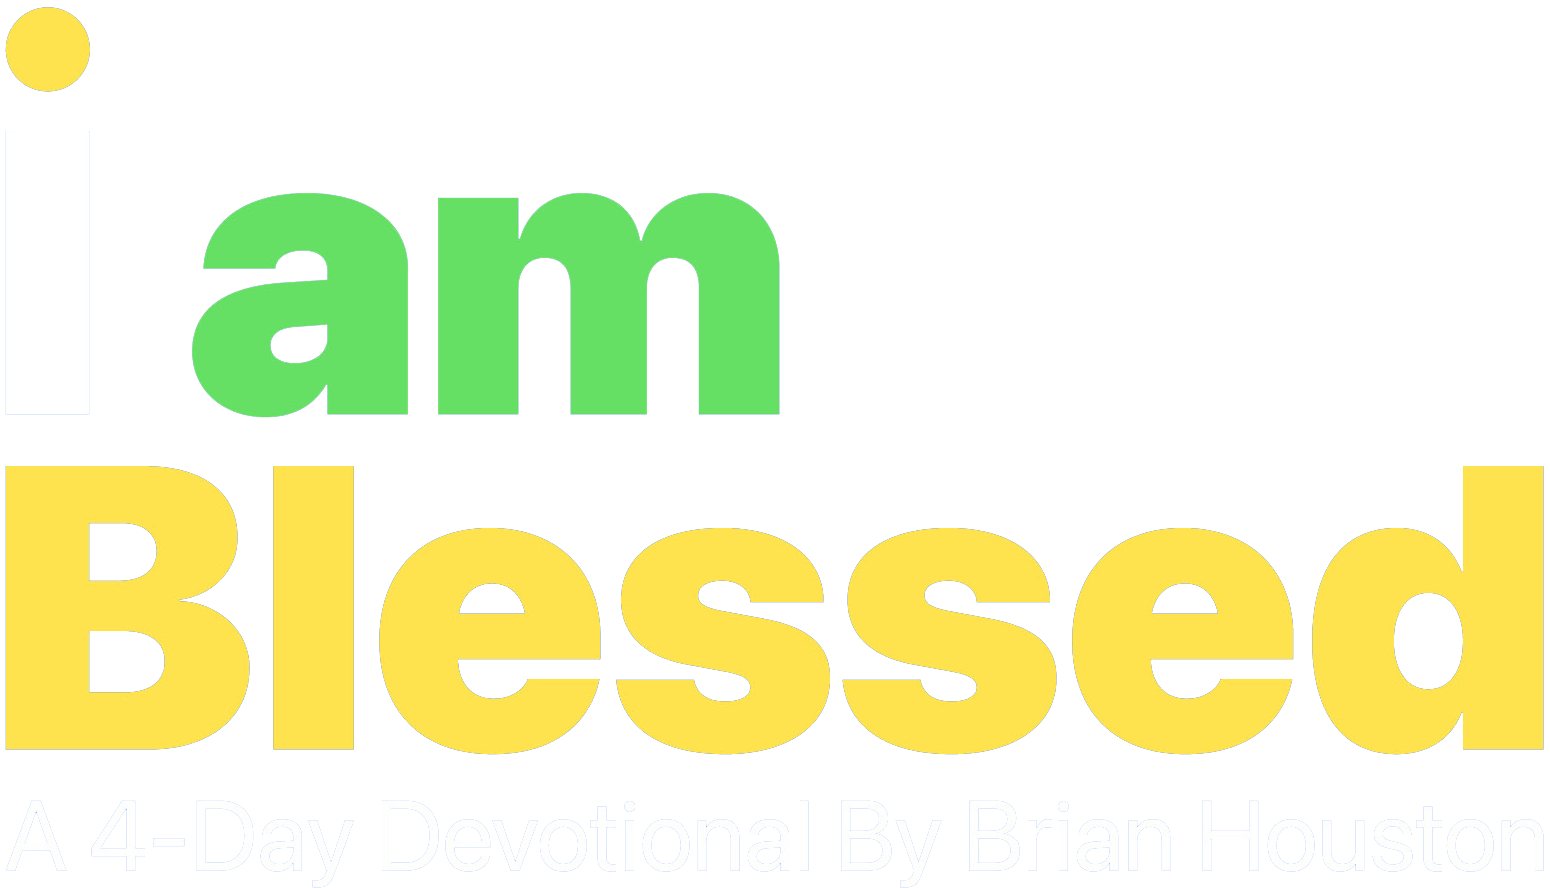 i am Blessed. A 4-day devotional by Brian Houston